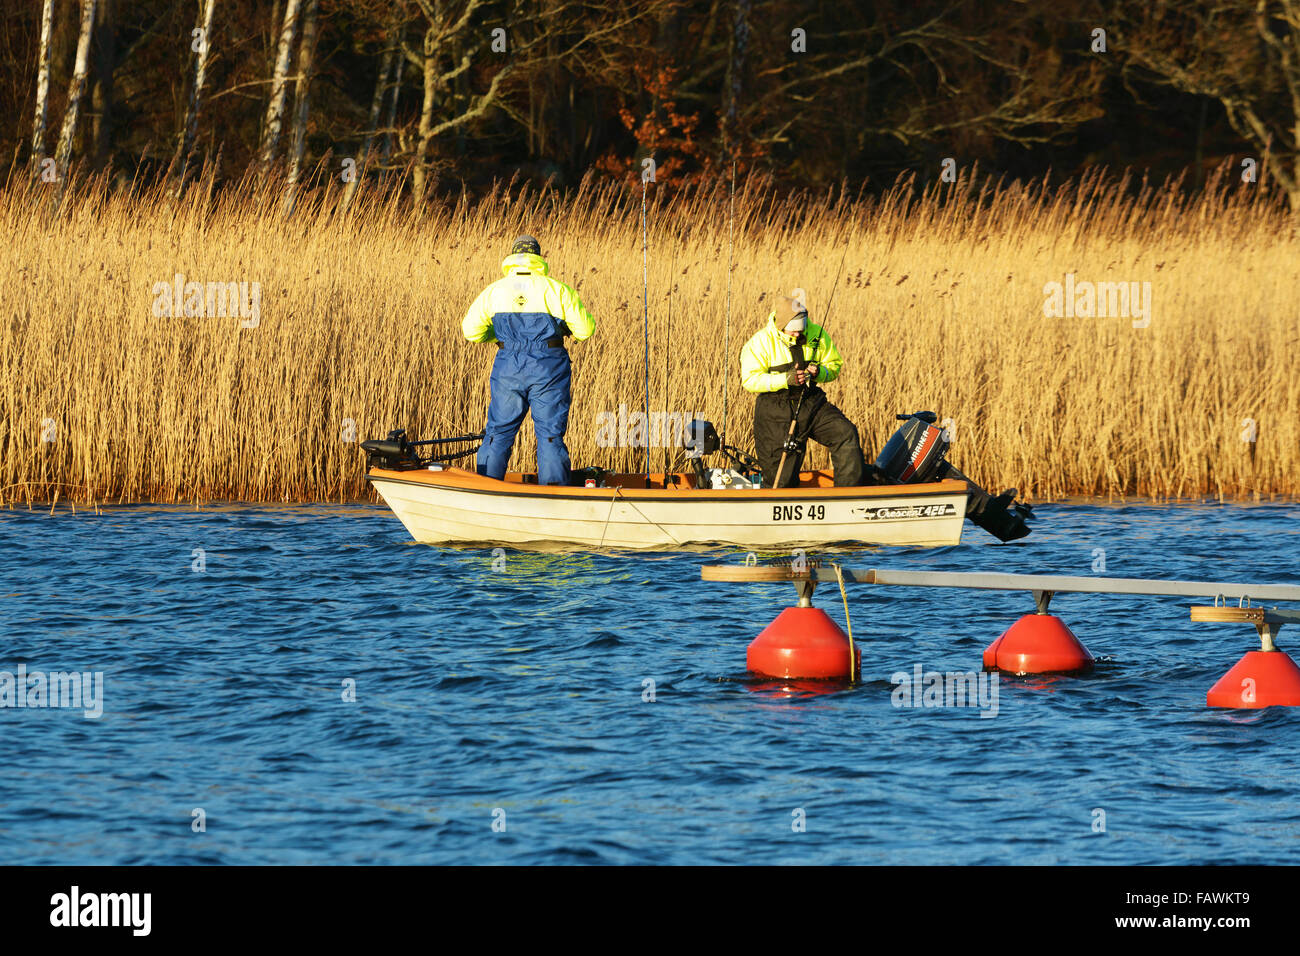 Ronneby, Sweden - December 30, 2015: Two persons fishing from a small open boat in late December. Sweden had very high average t Stock Photo